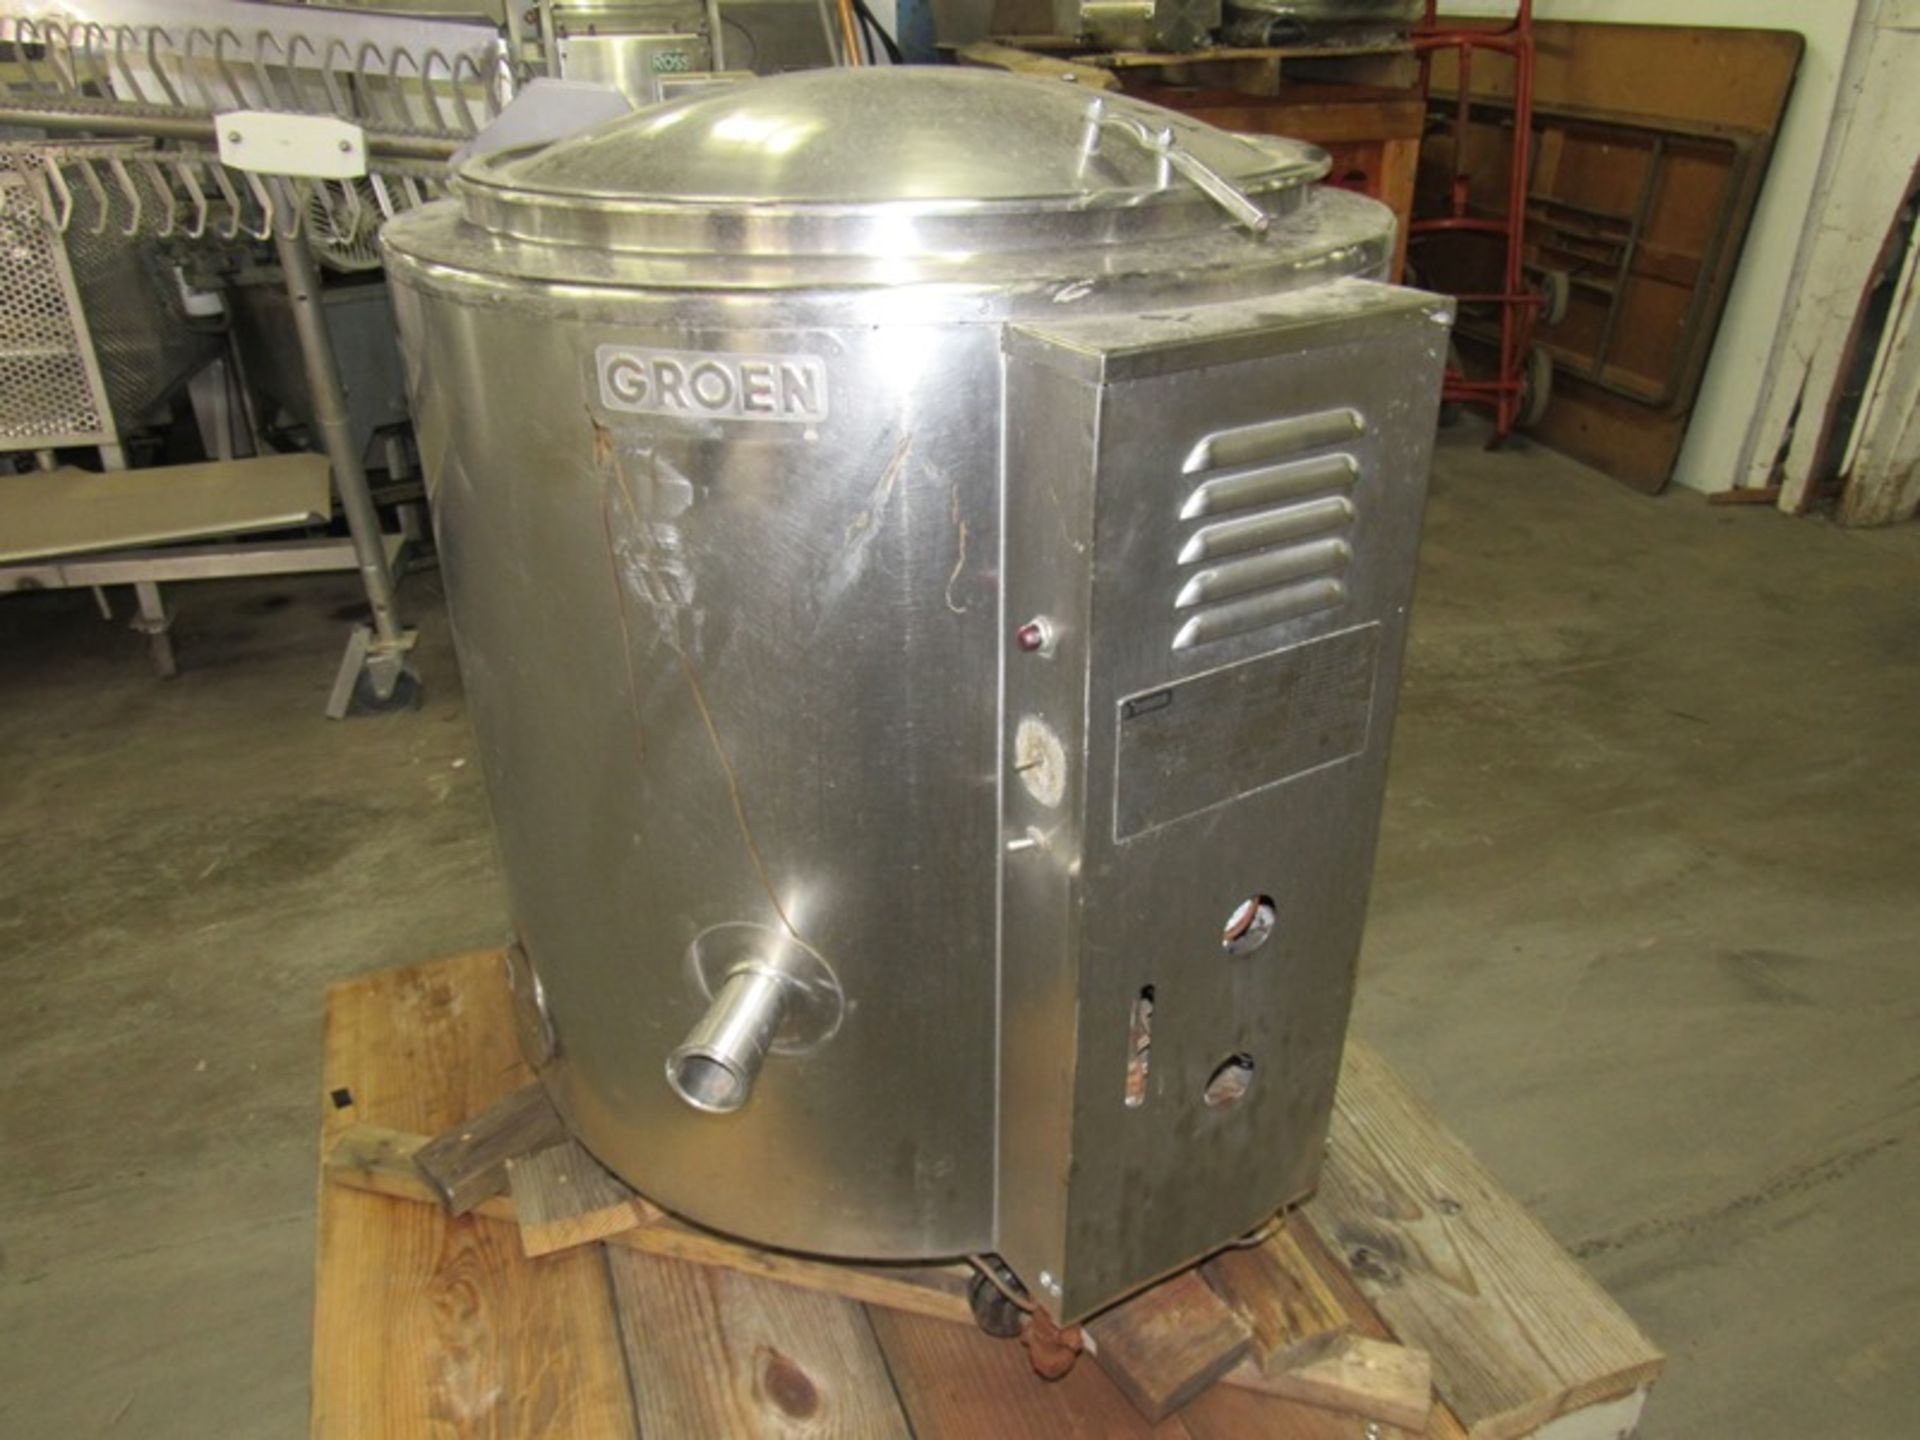 Groen Mdl. AH/1-40 Self Contained Kettle, natural gas fired, 115 volt controls, national board #